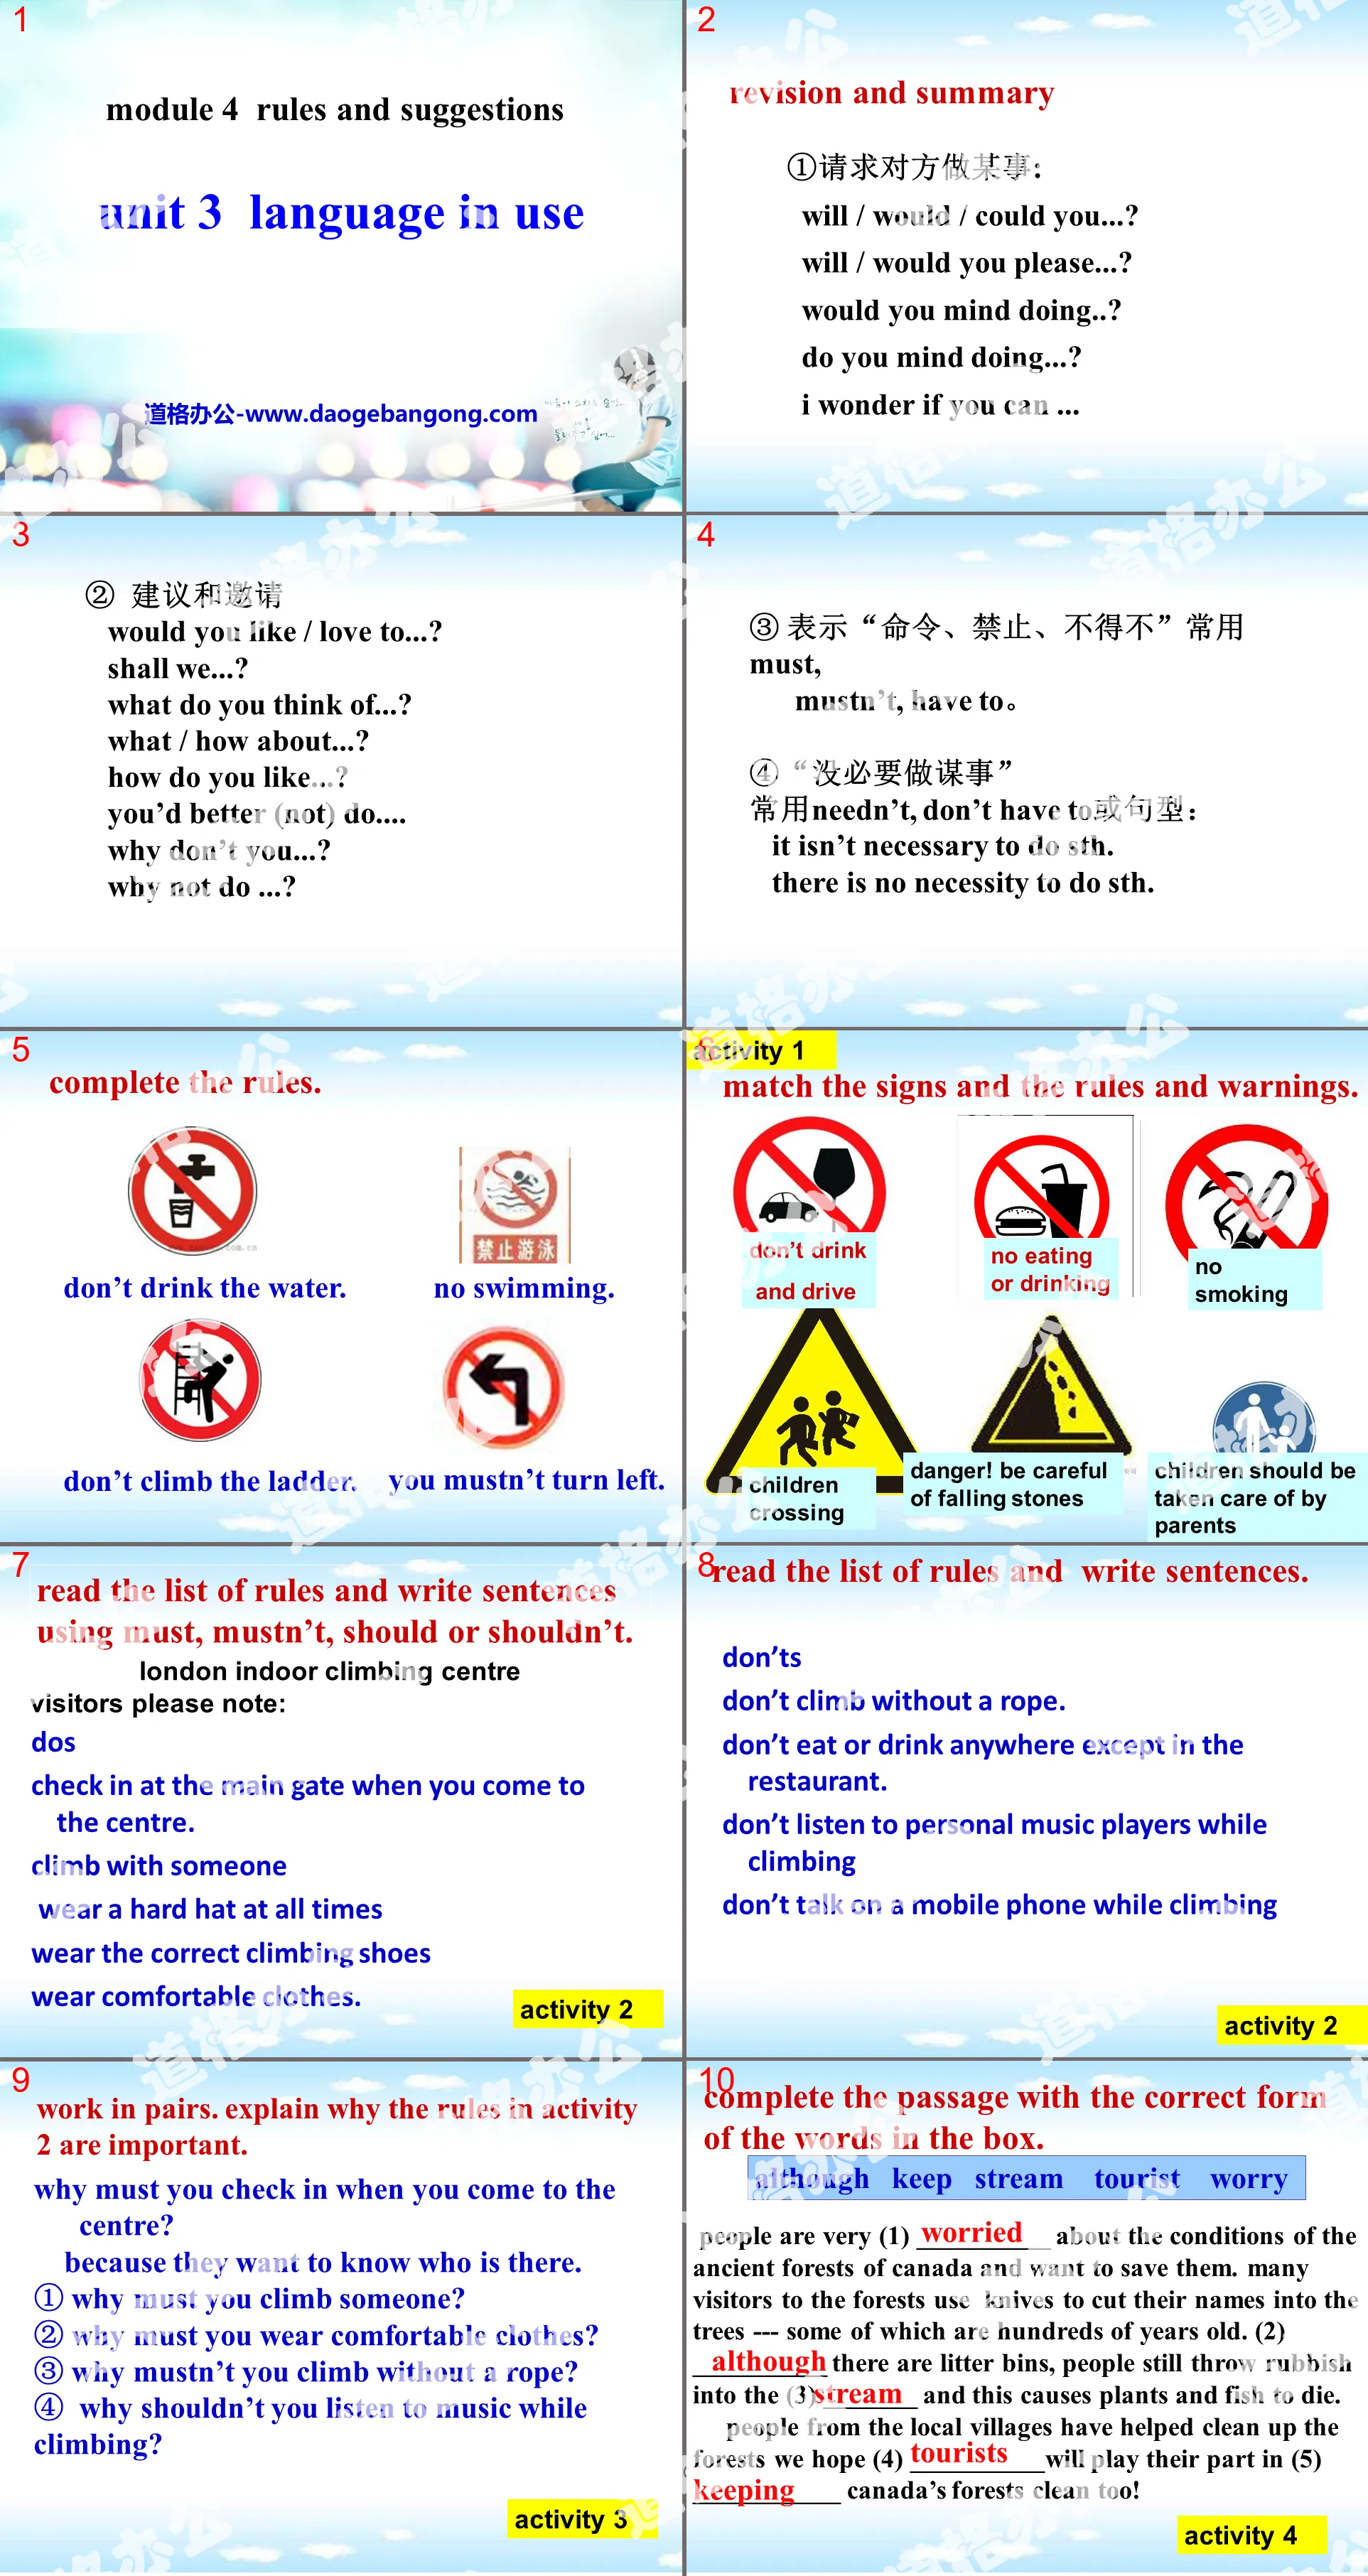 《Language in use》Rules and suggestions PPT課件2